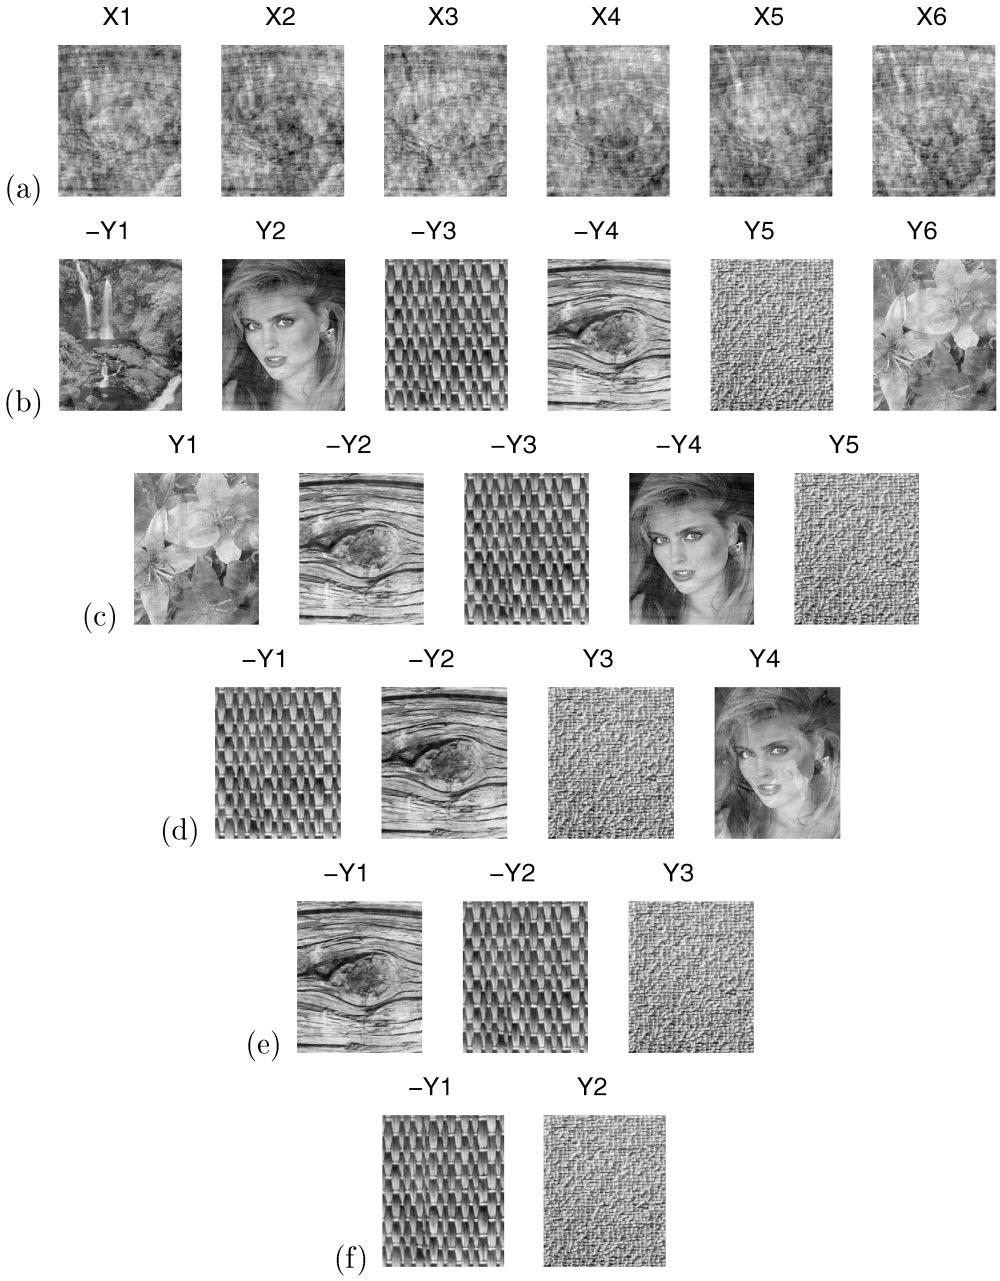 76 A. Cichocki et al./neurocomputing 24 (1999) 55 93 Fig. 8. Examples of source separation using a modified network with non-square matrix W.